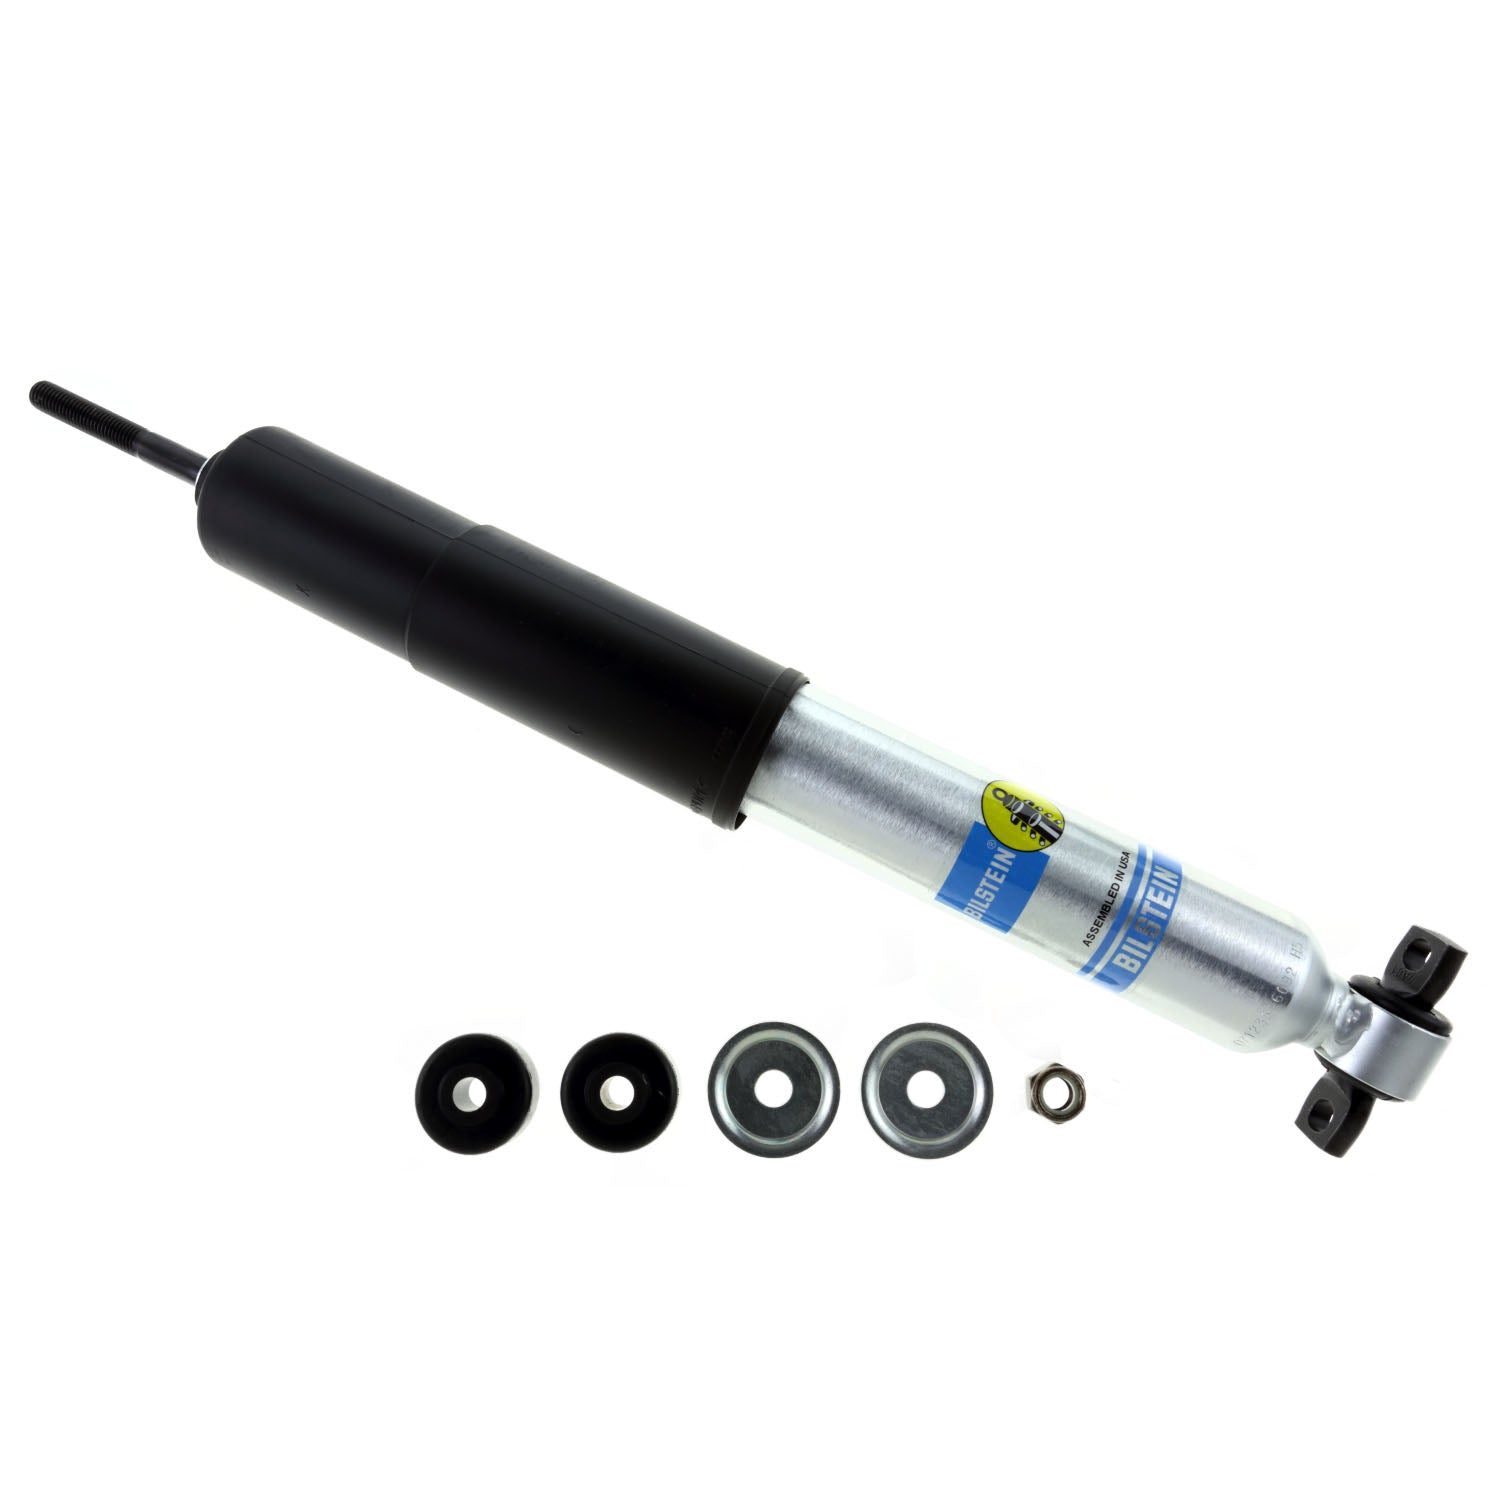 Bilstein 5100 Rear Shk 80-96 F150-350 W/2-4' For Ford Bronco, Ford Expedition, Ford F-150, Ford F-250, Ford F-350